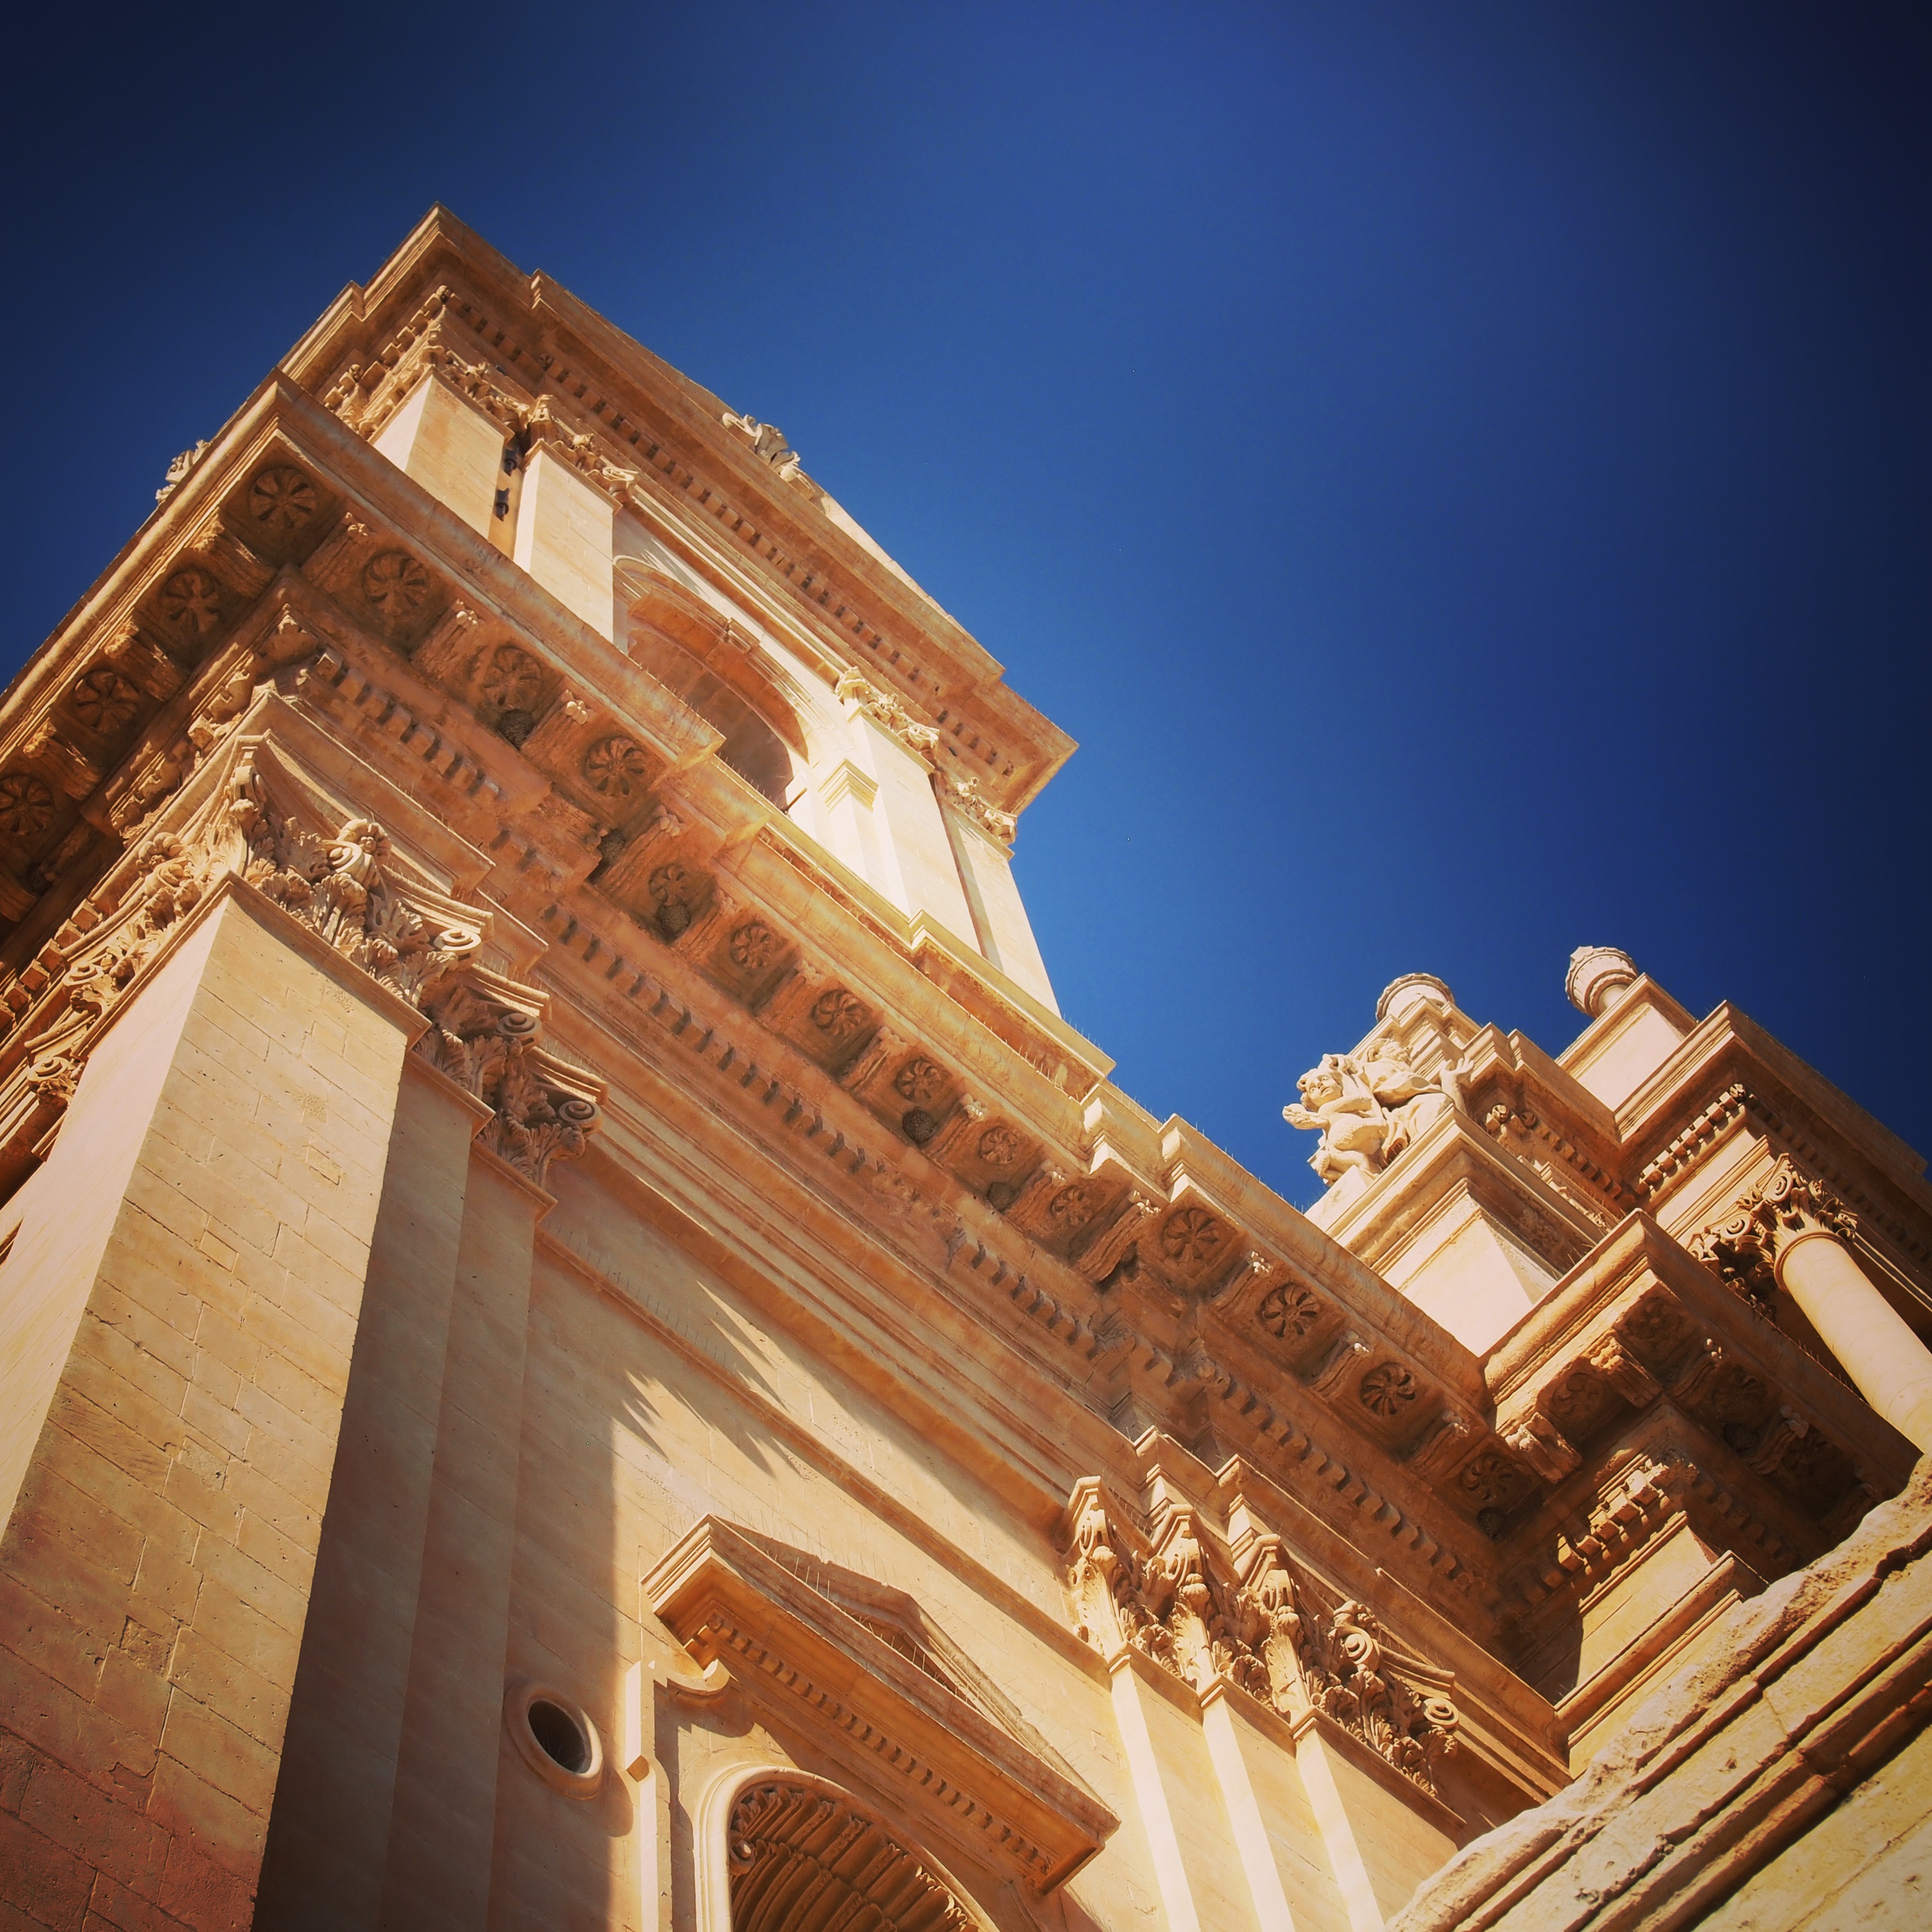 A Tower in Noto, Sicily, Italy via Instagram [Photo]